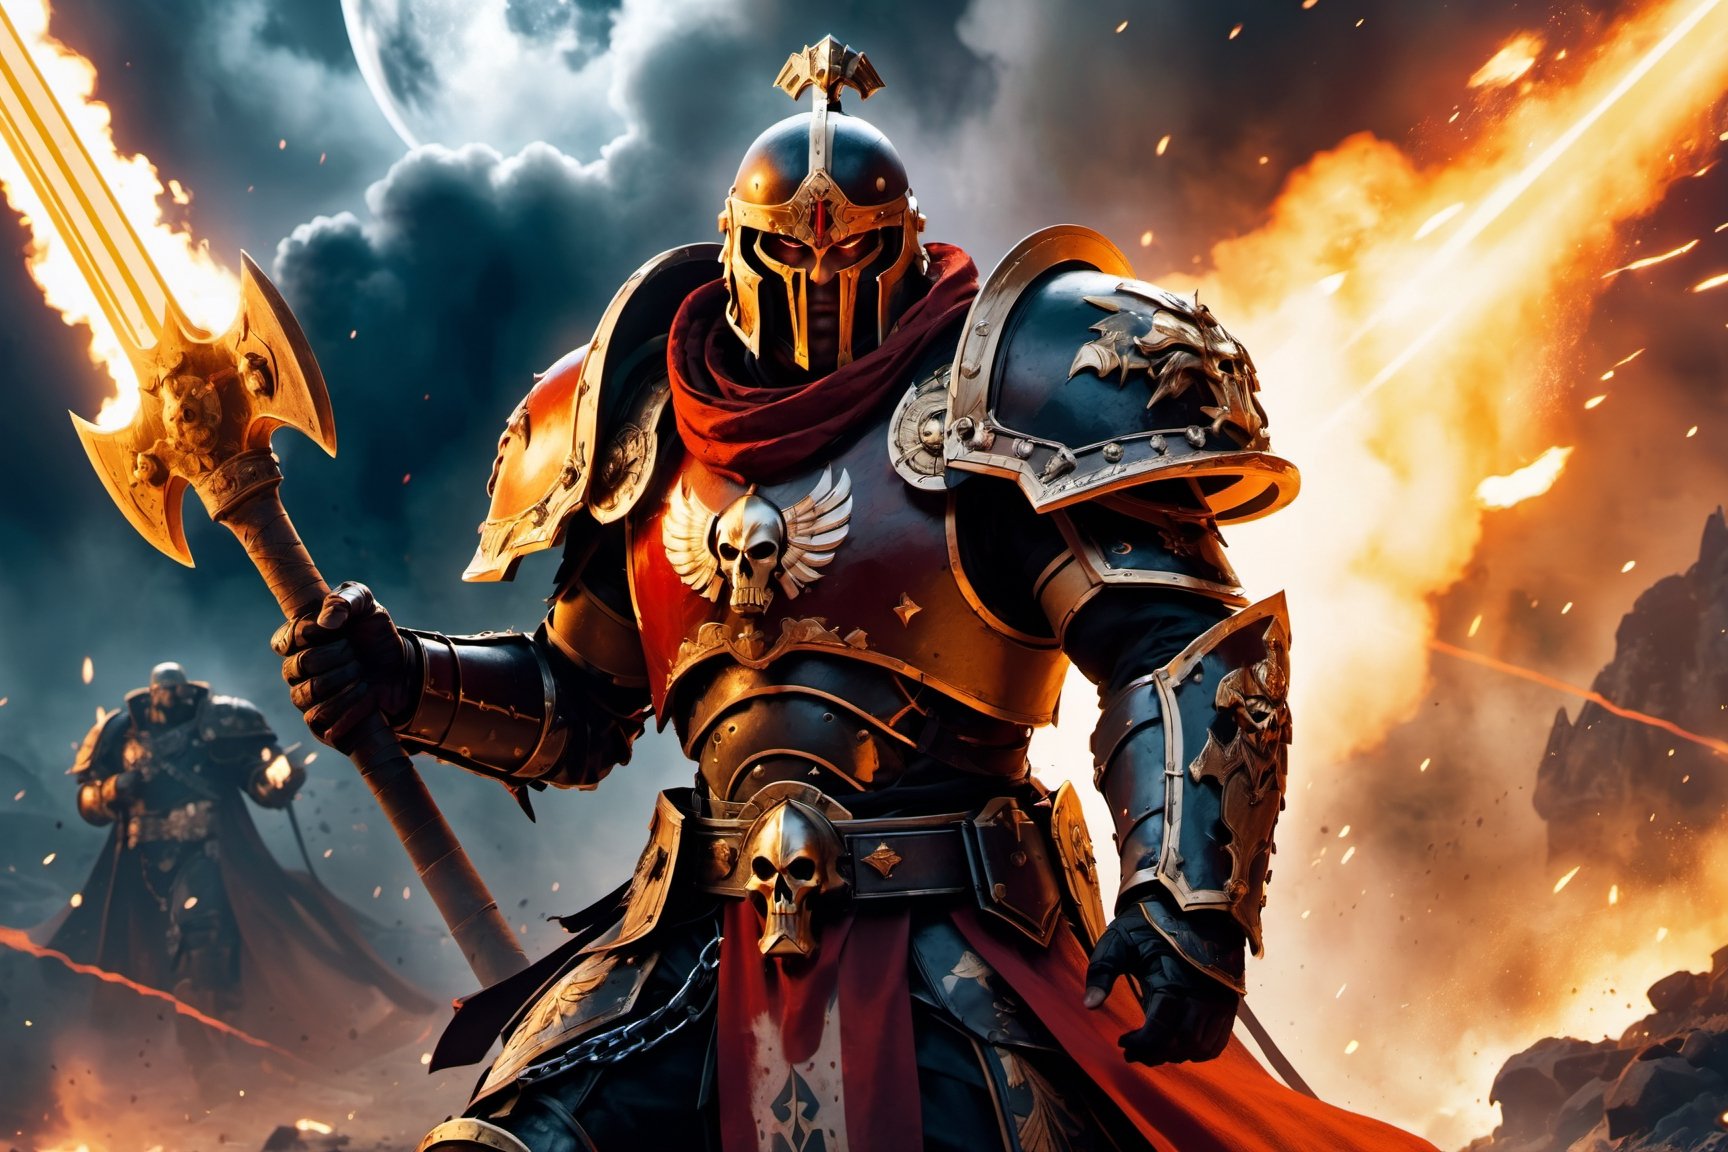 (8k HDR), (masterpiece, best quality),

Title: Ares, God of War in the Warhammer 40K Universe

"Ares as a Space Marine Captain in Warhammer 40K, charging into battle against alien enemies on a war-torn planet. He wears ornate, blood-red power armor adorned with war symbols and skulls, wielding a glowing thunder hammer wrapped in chains and a bolt pistol. The battlefield is chaotic with explosions, smoke, and falling drop pods, under a dark, fiery sky."

dark and vibrant, (micheal bay cinematic shots), depth of field, 2D